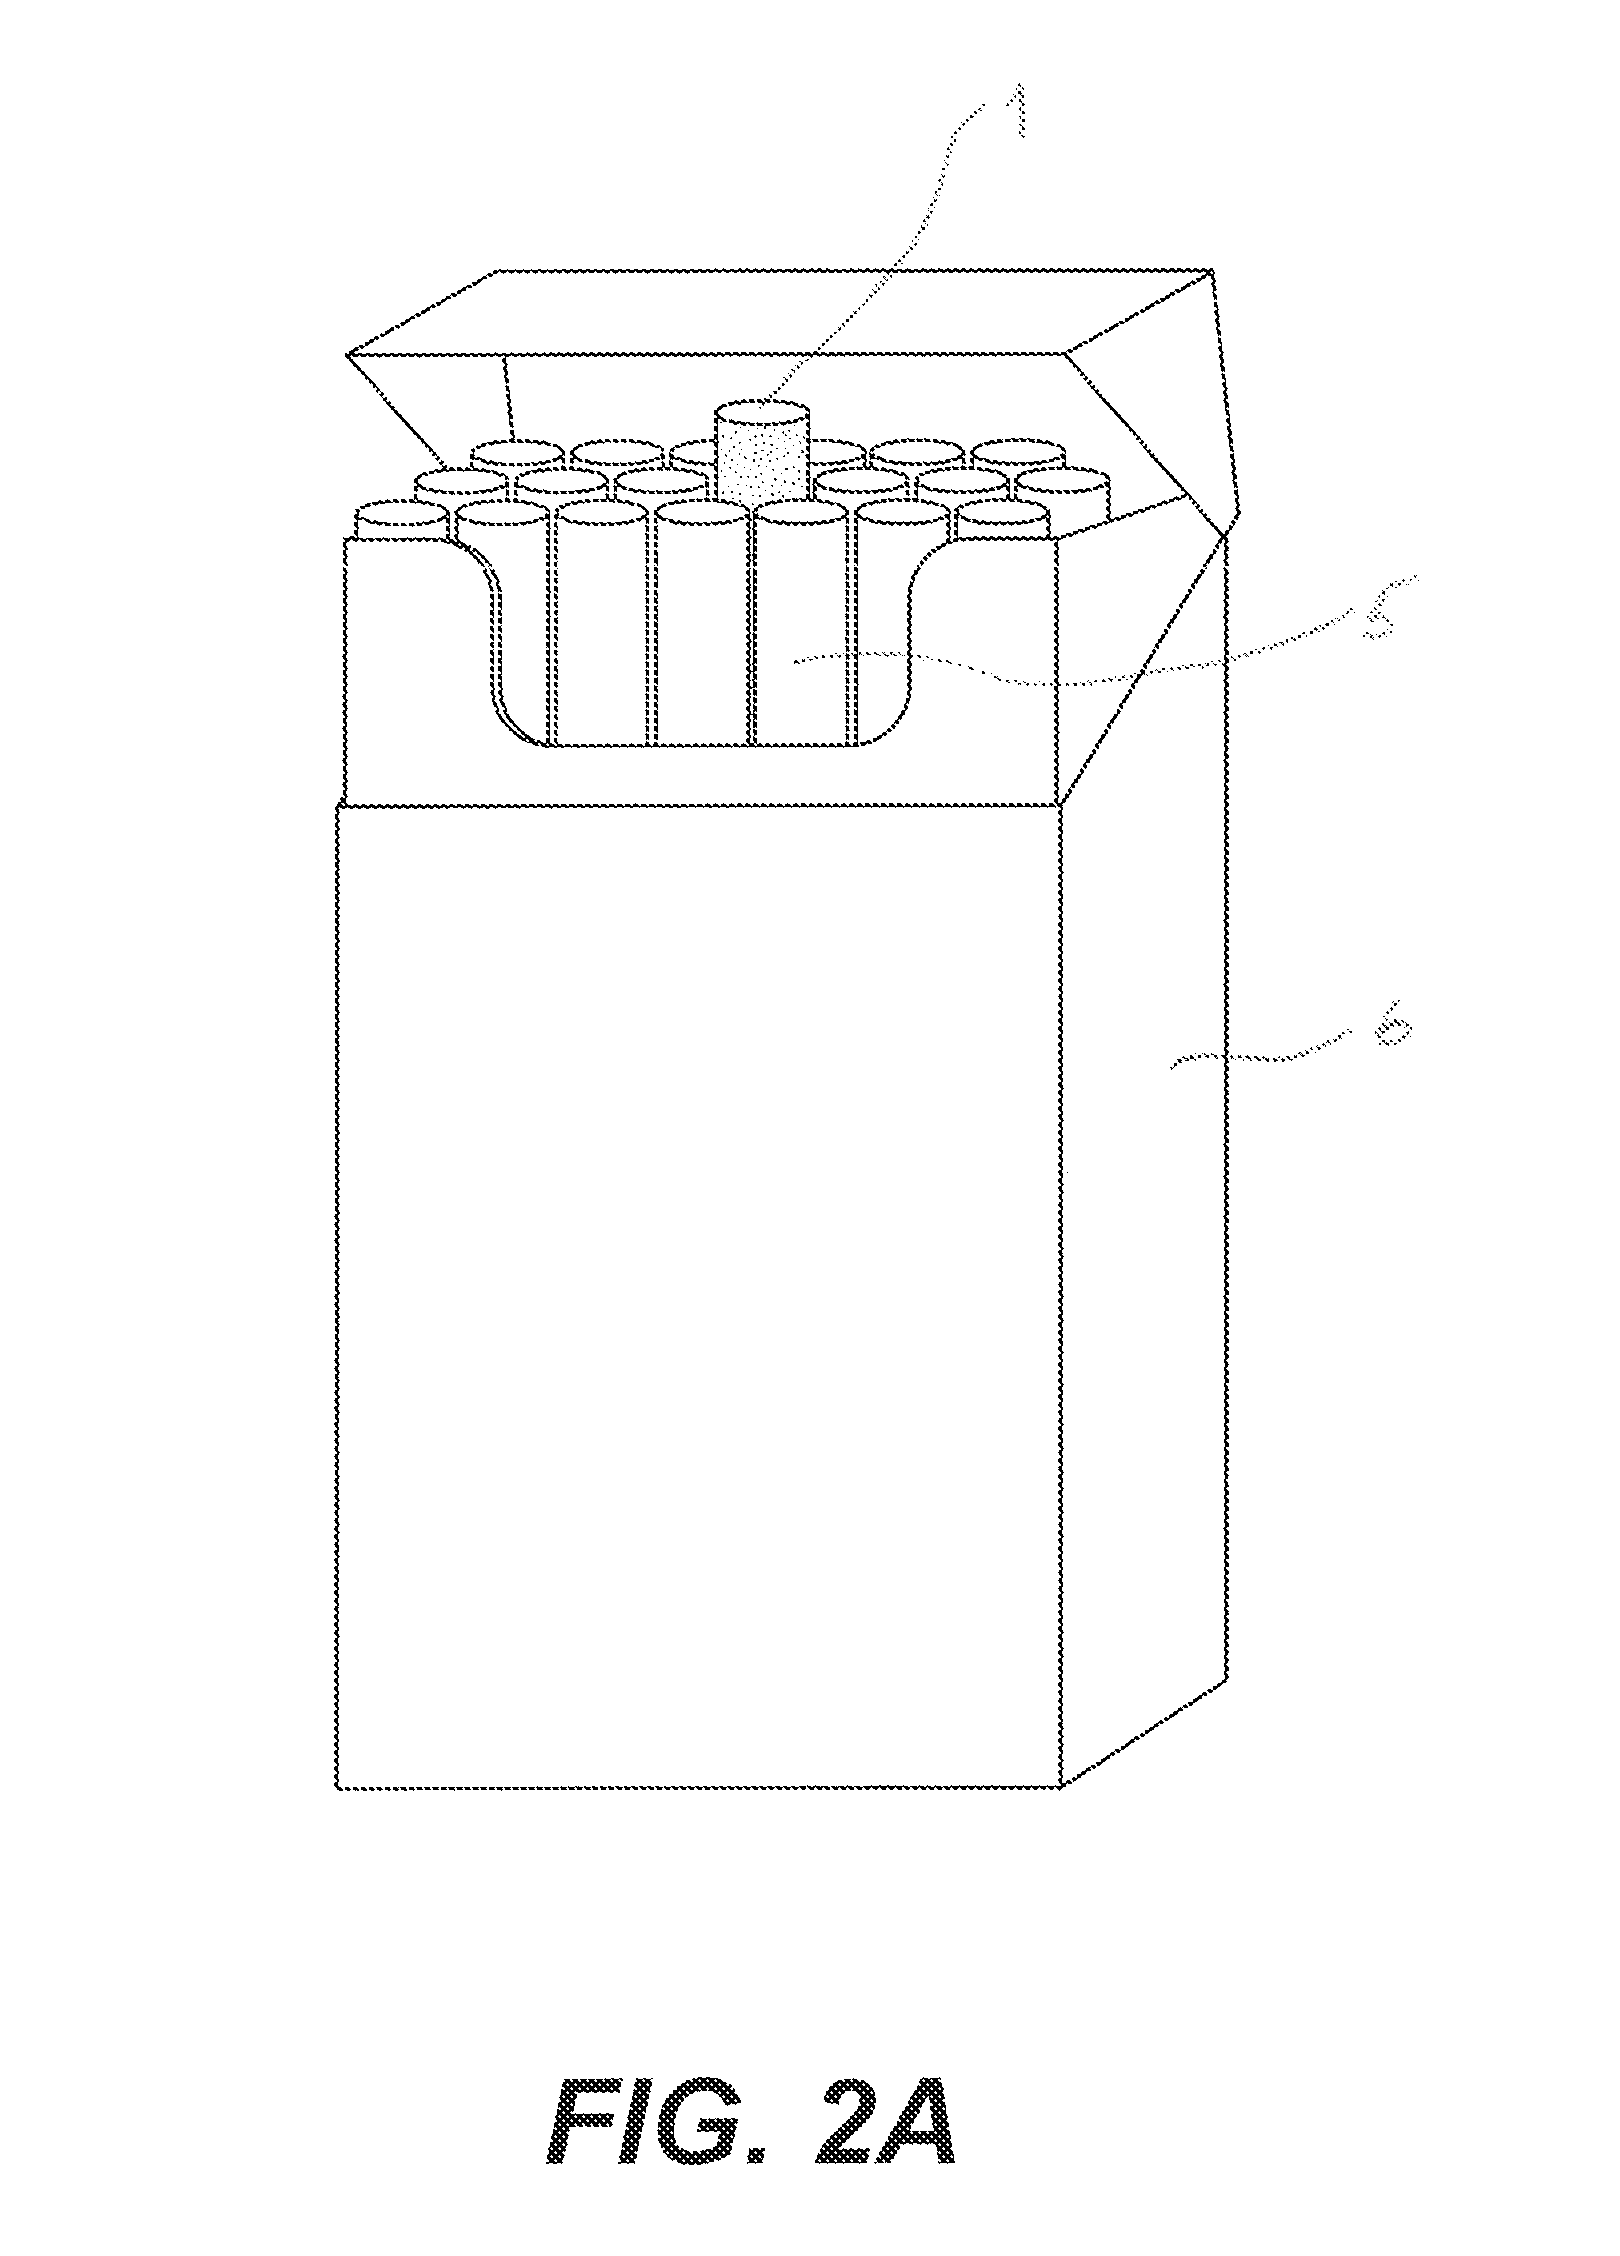 Methods, Devices and Compositions to Enable to Flavor of Smoking Articles Including Tobacco and Marijuana